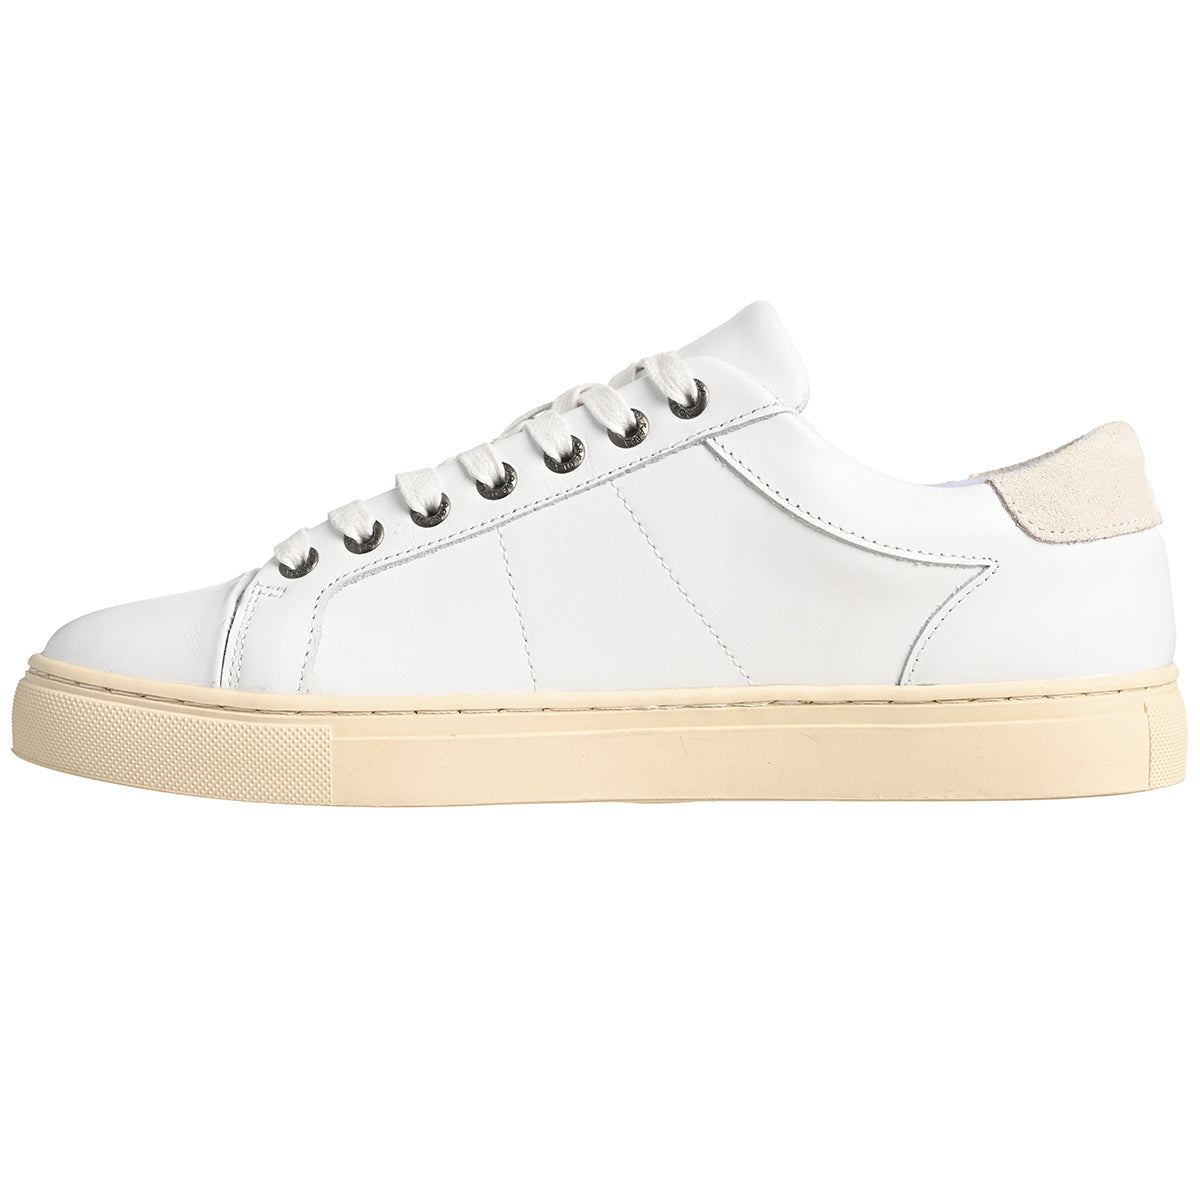 Chaussures lifestyle Derby Robe di Kappa blanc unisexe - Image 2